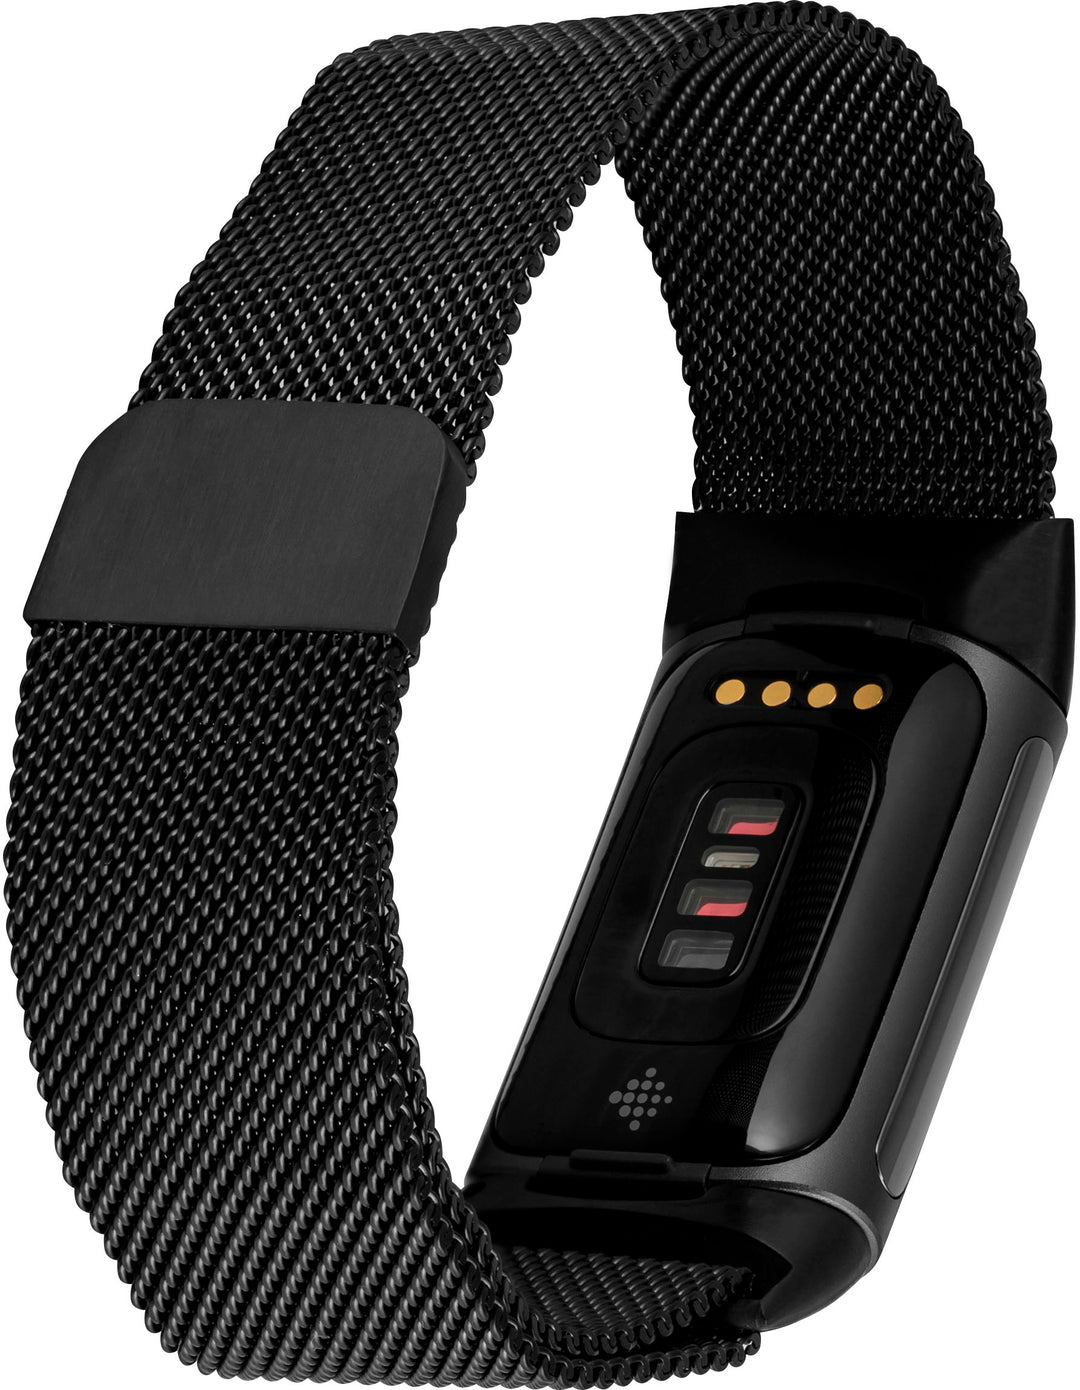 WITHit - Fitbit Charge 5 3-pack (black mesh, bluestone sport and black woven) - Woven Black/Bluestone/Black_9